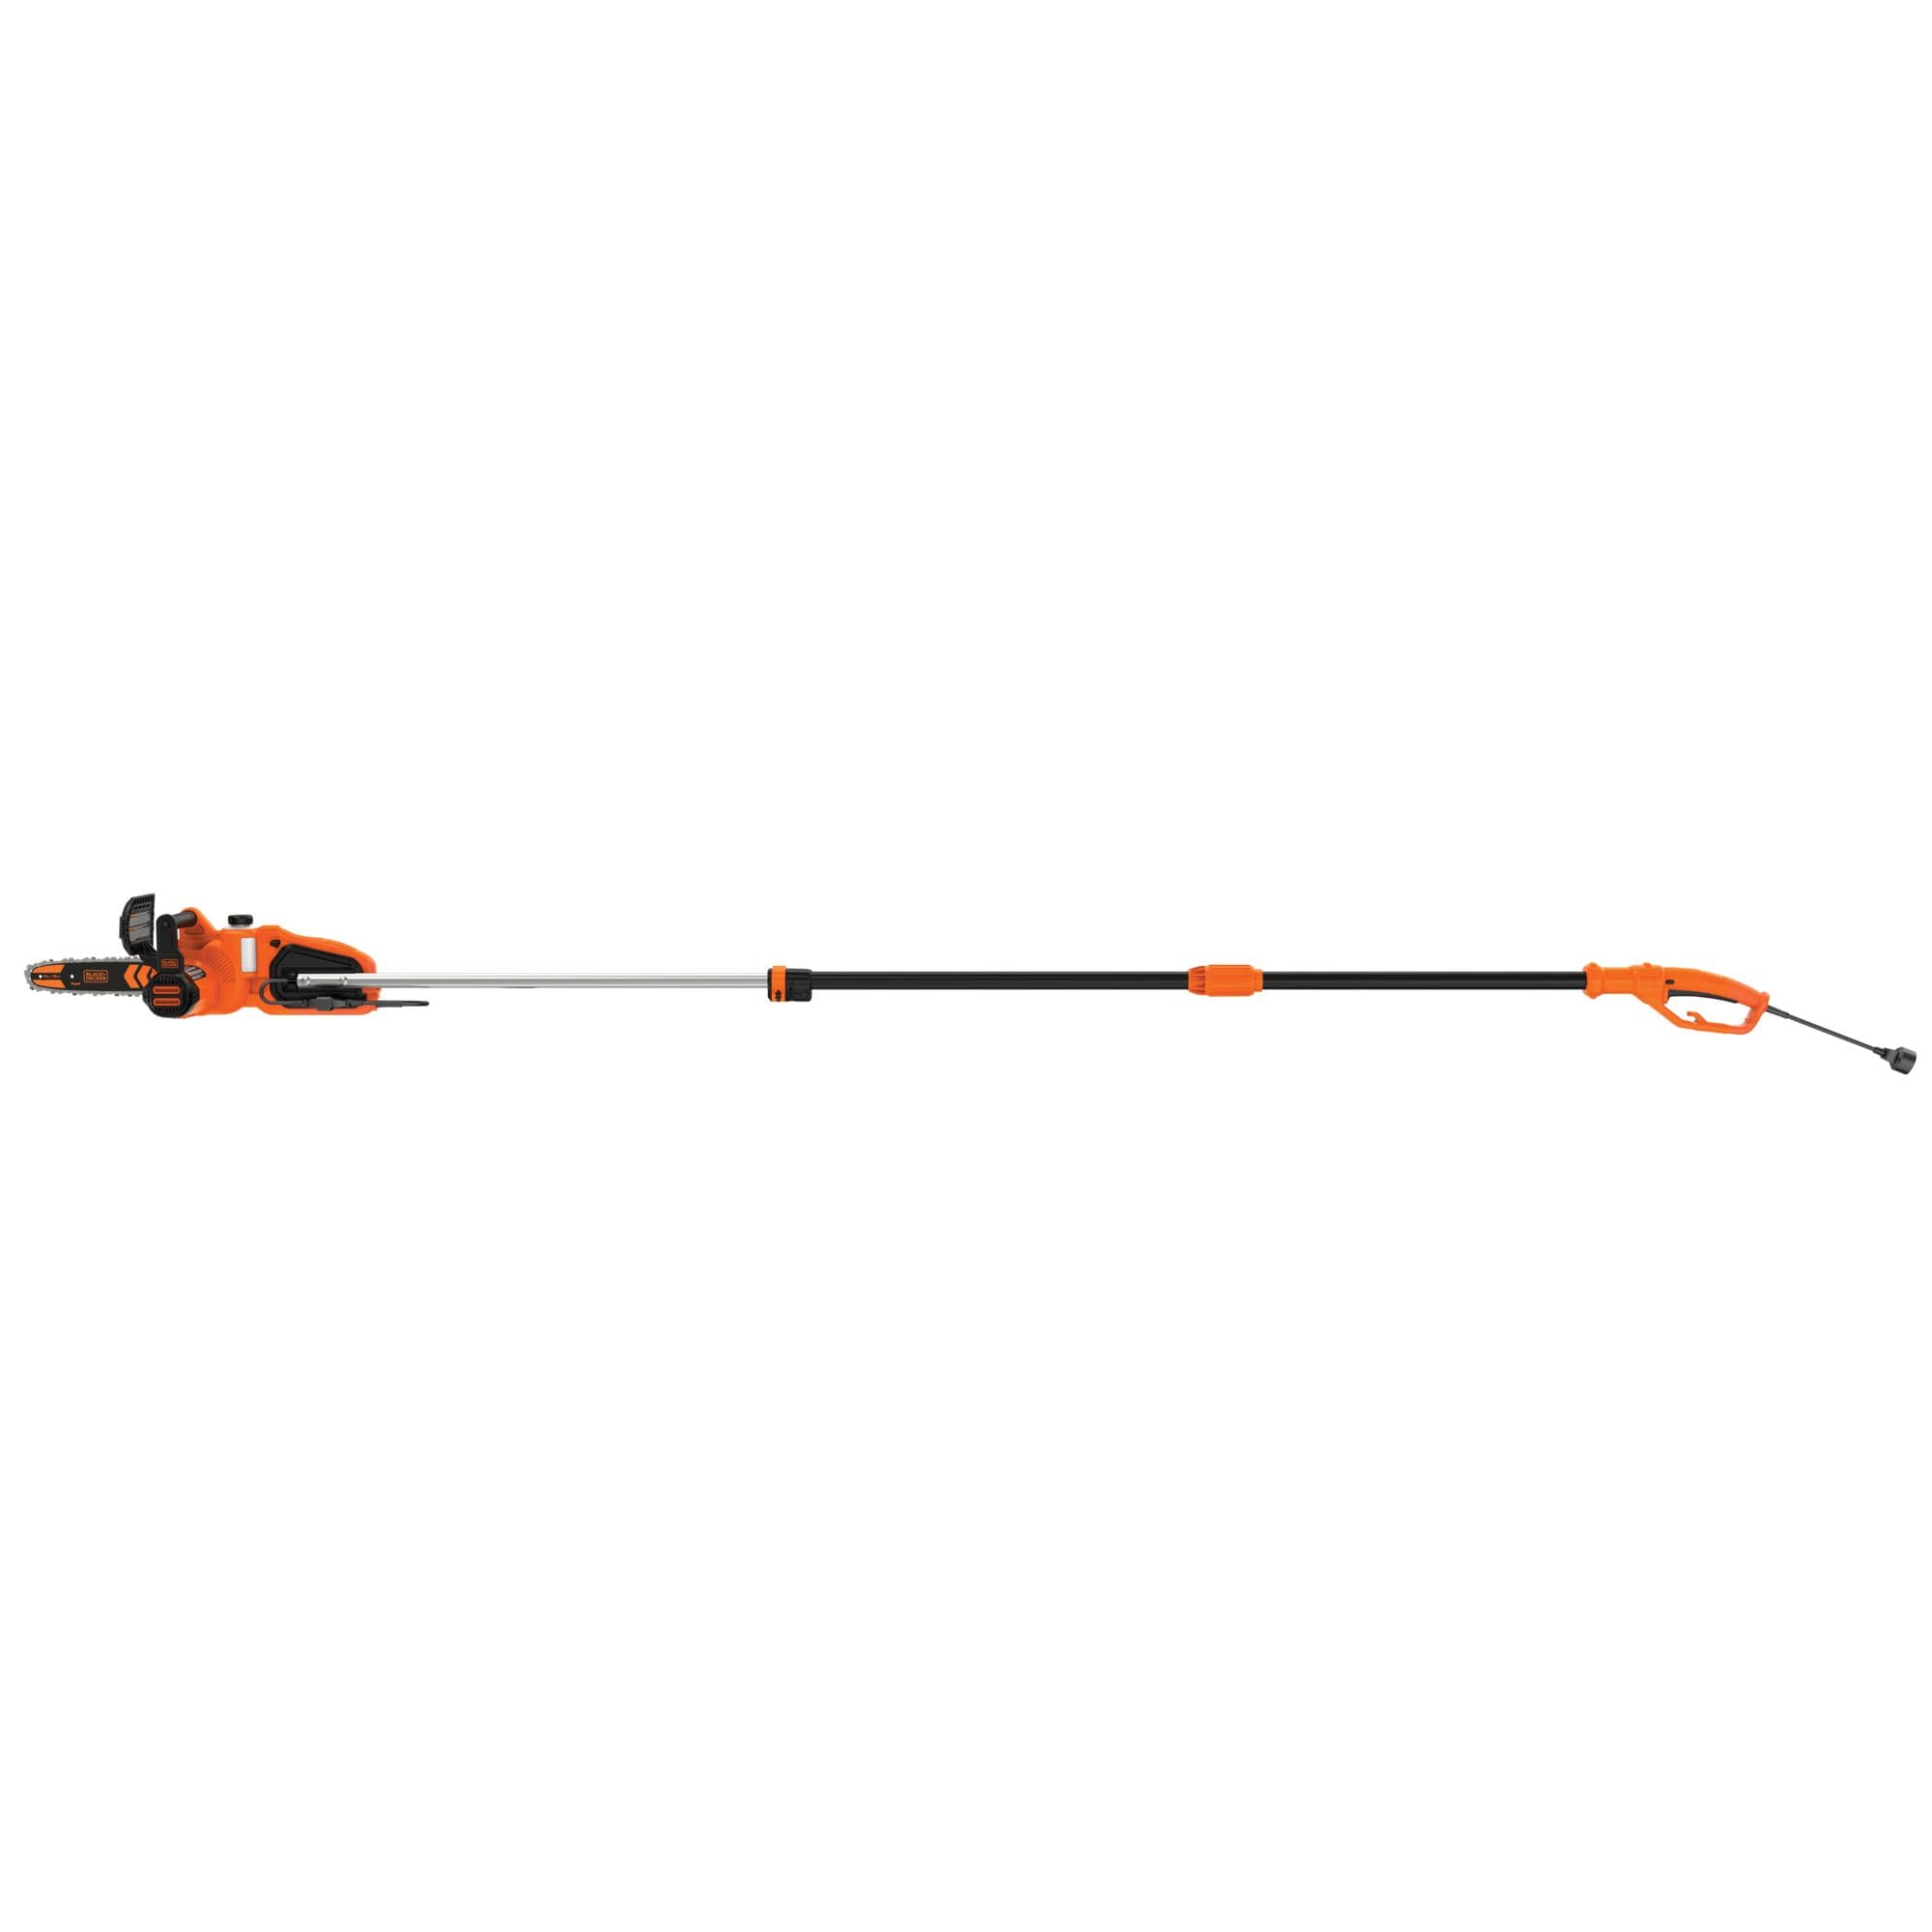 Black + Decker PP610 Corded Pole Saw Is Ideal for Rapid Storm Cleanup -  GeekDad